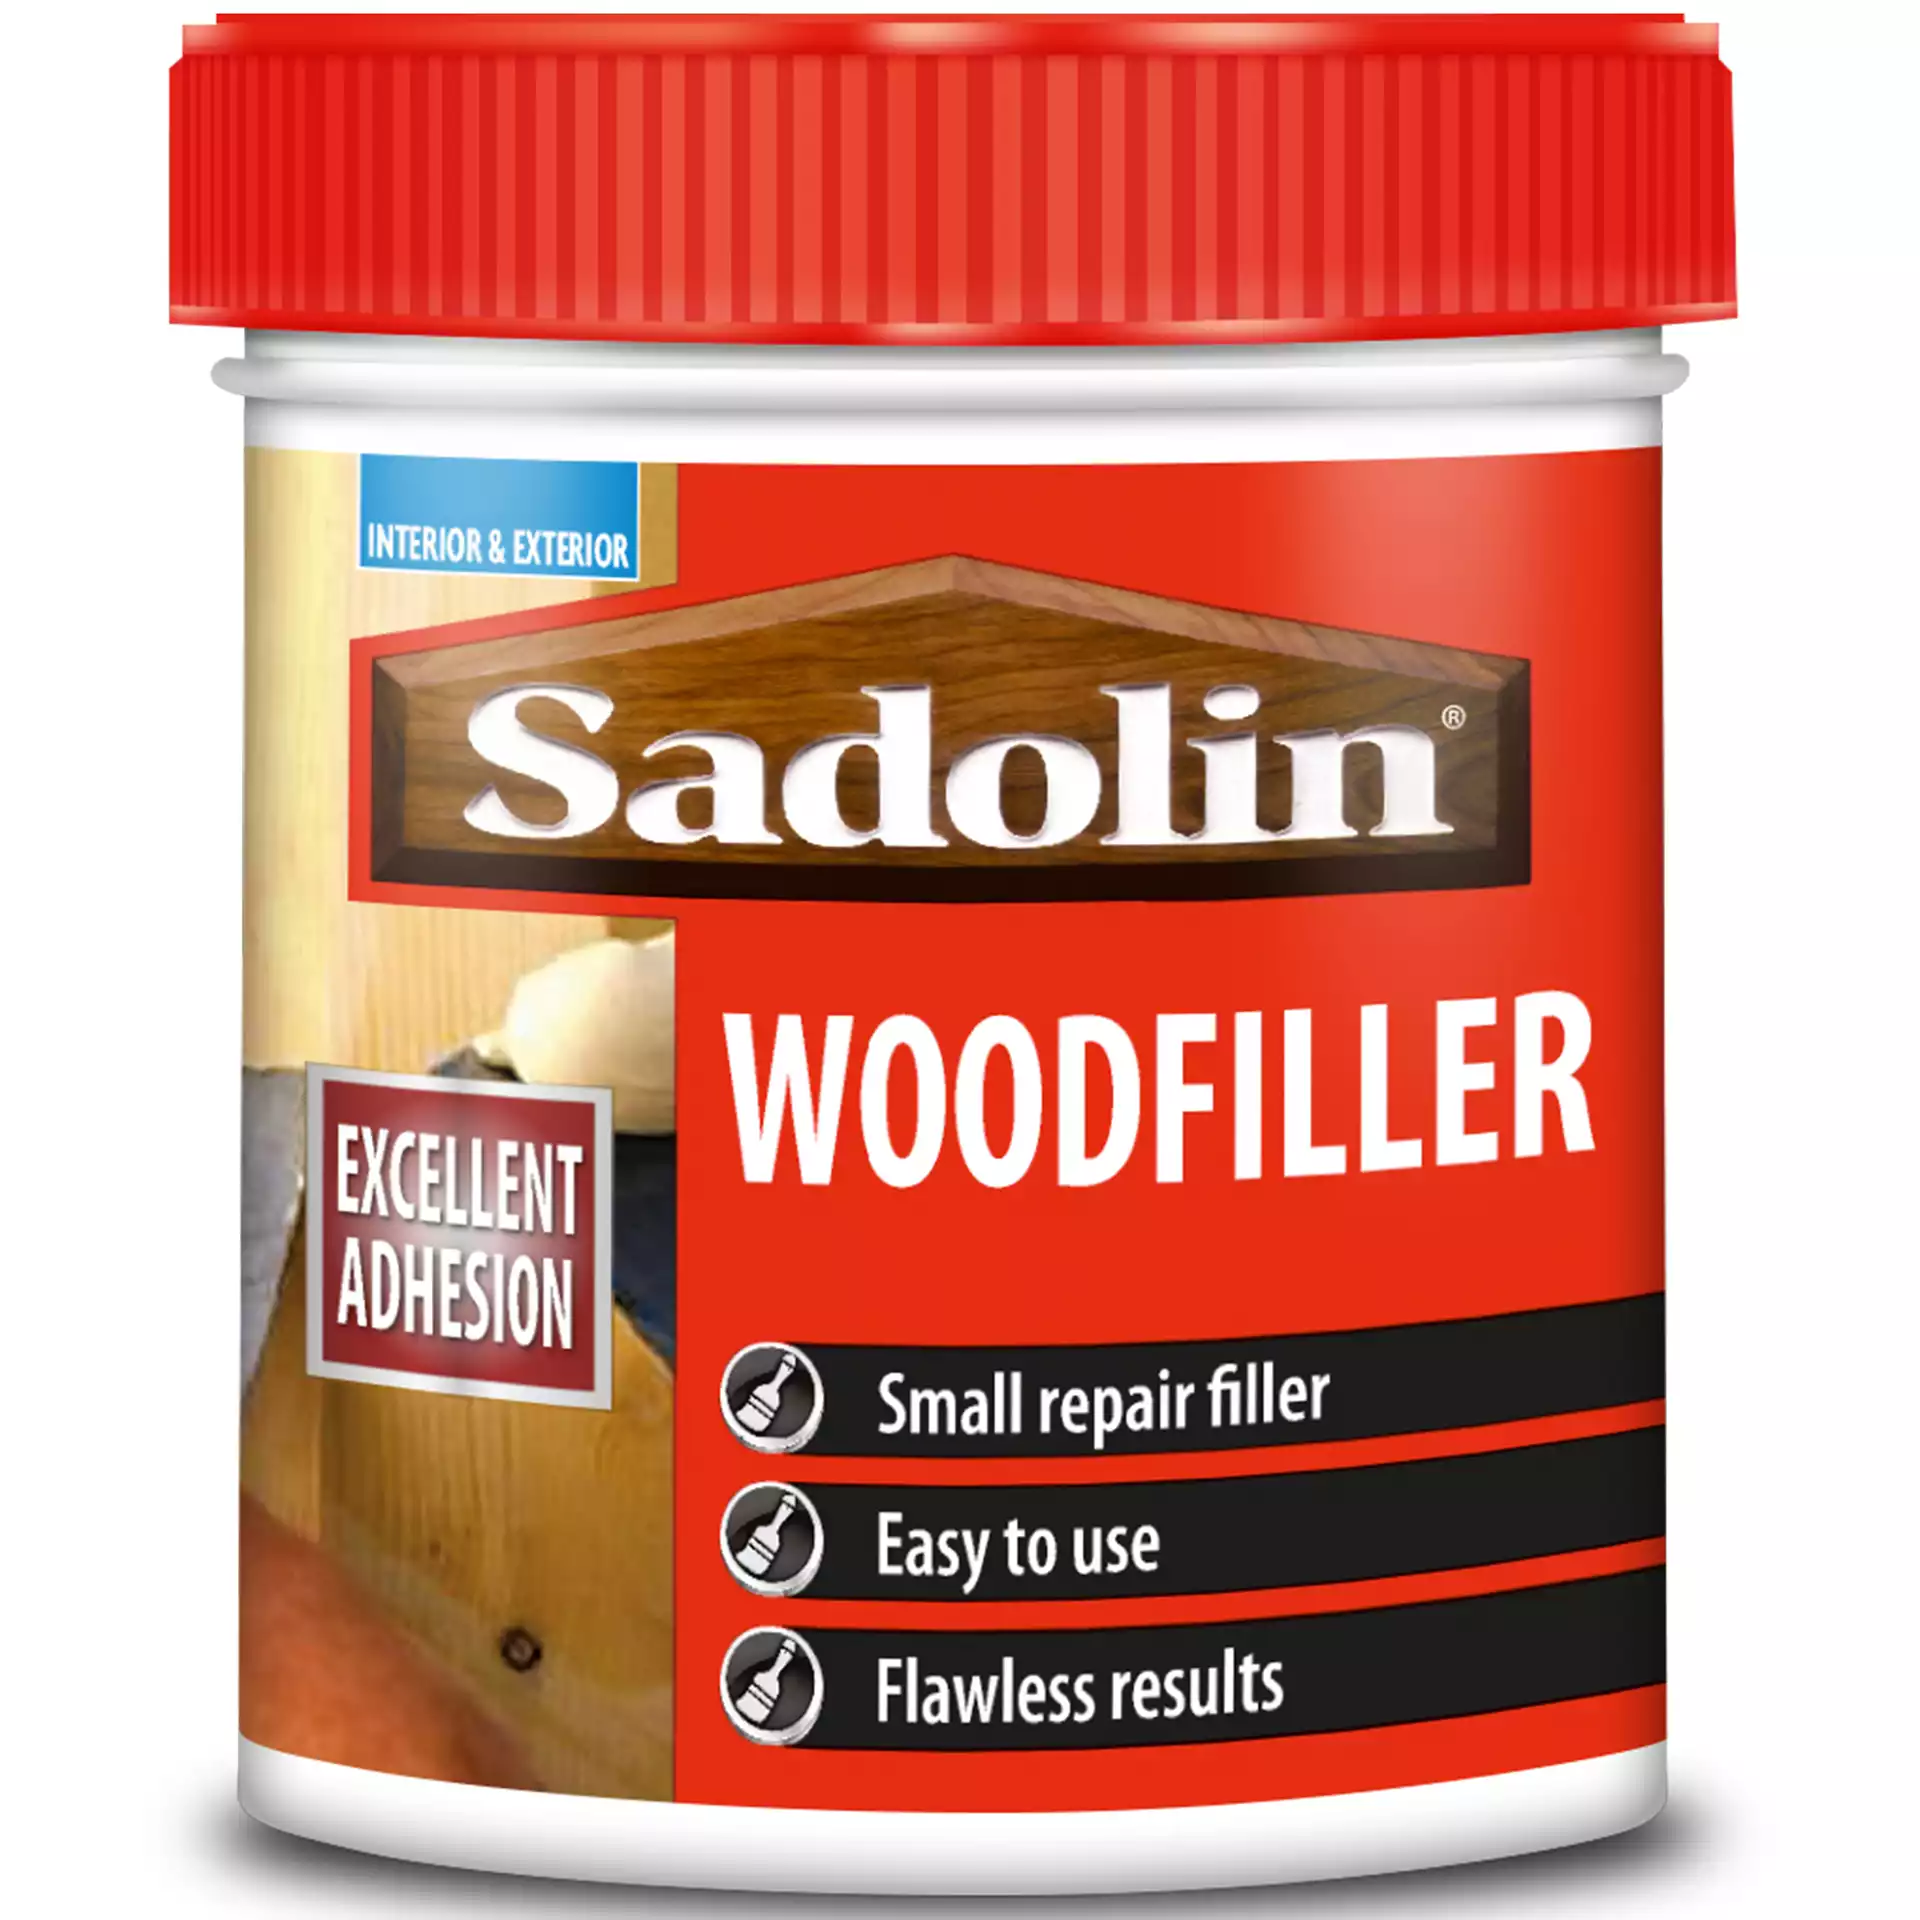 How to Use Interior and Exterior Wood Filler - Wood Finishes Direct